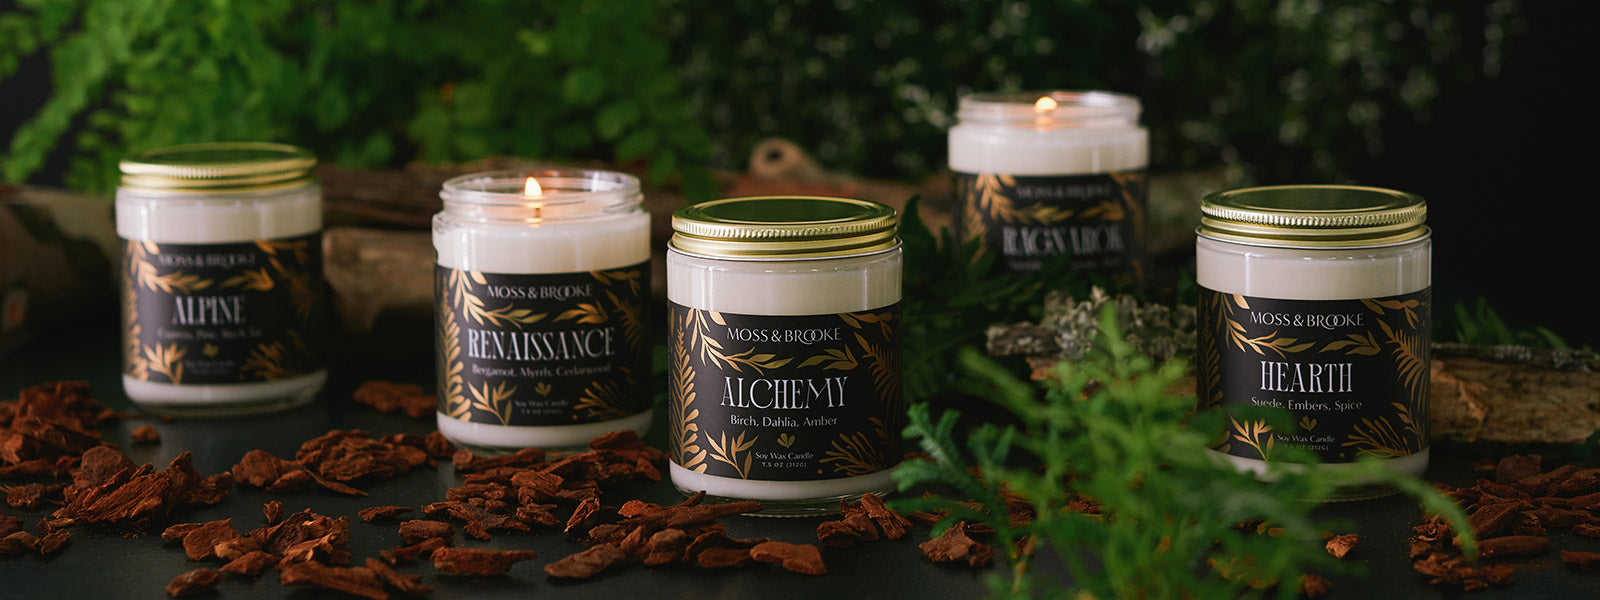 Moss & Brooke about page banner artwork of botanical inspired candle range with gold foil.